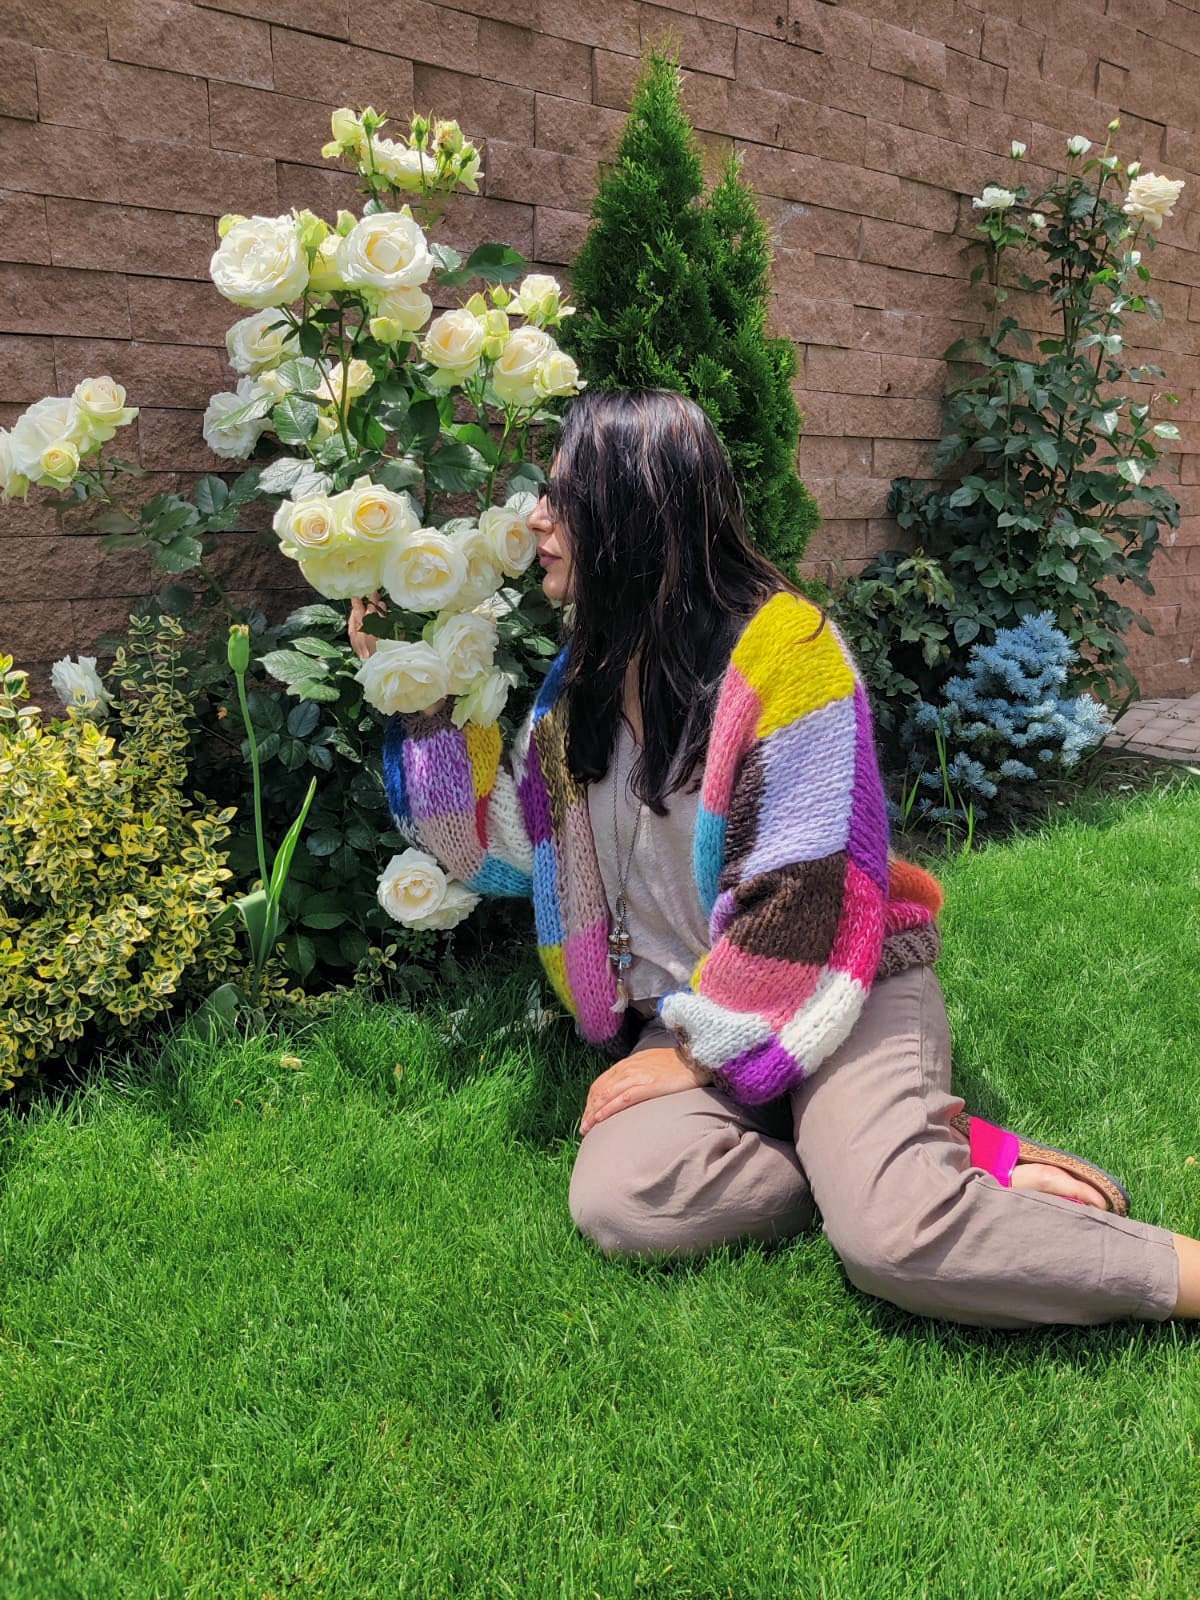 Patchwork Mohair Cardigan with Balloon Sleeves, Oversized Sweater, Hand Knit Jumper, Rainbow Cardigan, Square Multicolor Jumper, Color Check